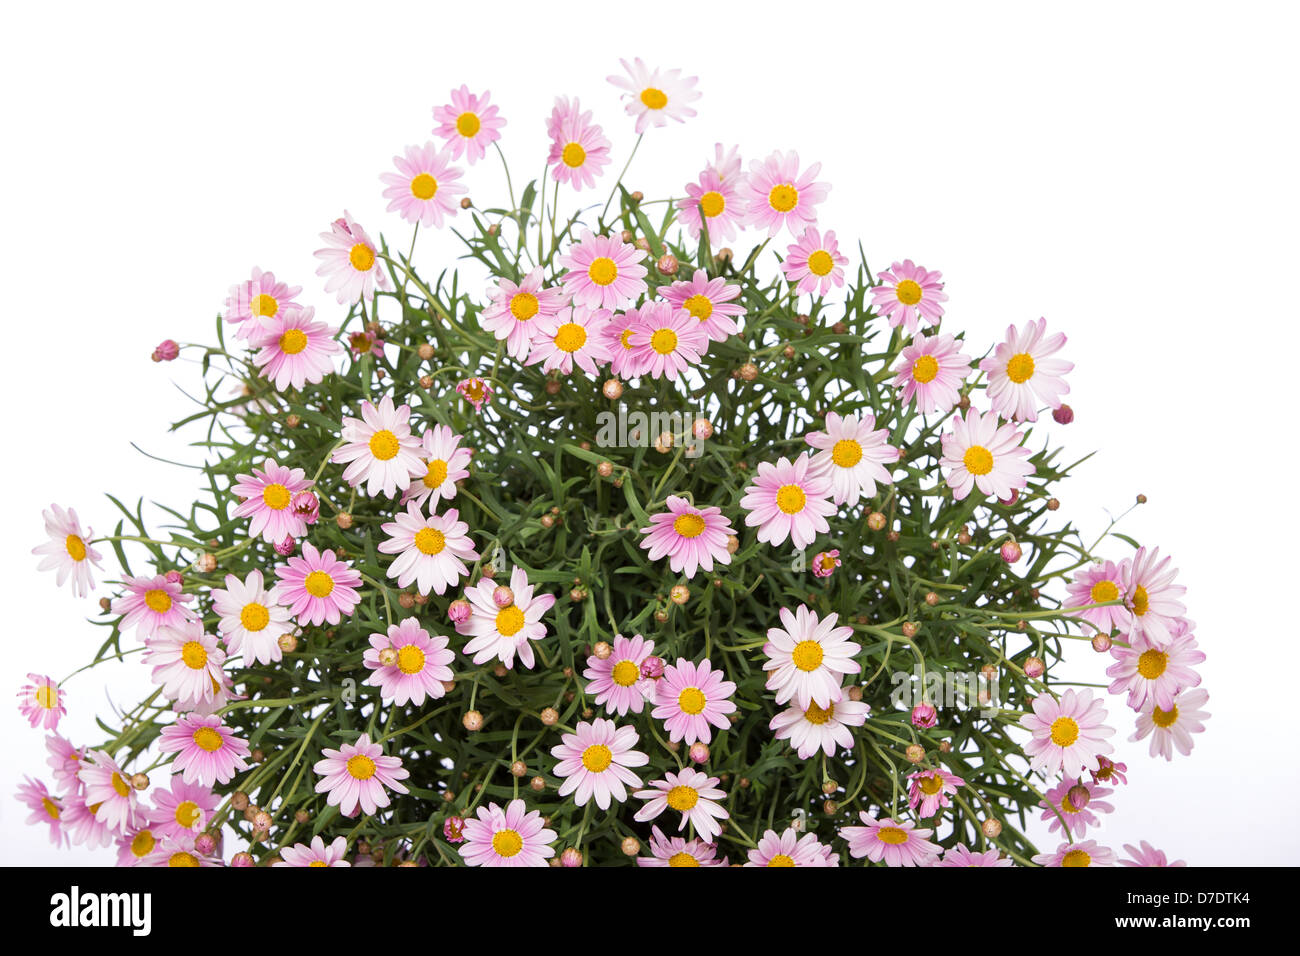 Delicate daisy flower bouquet on white background Stock Photo